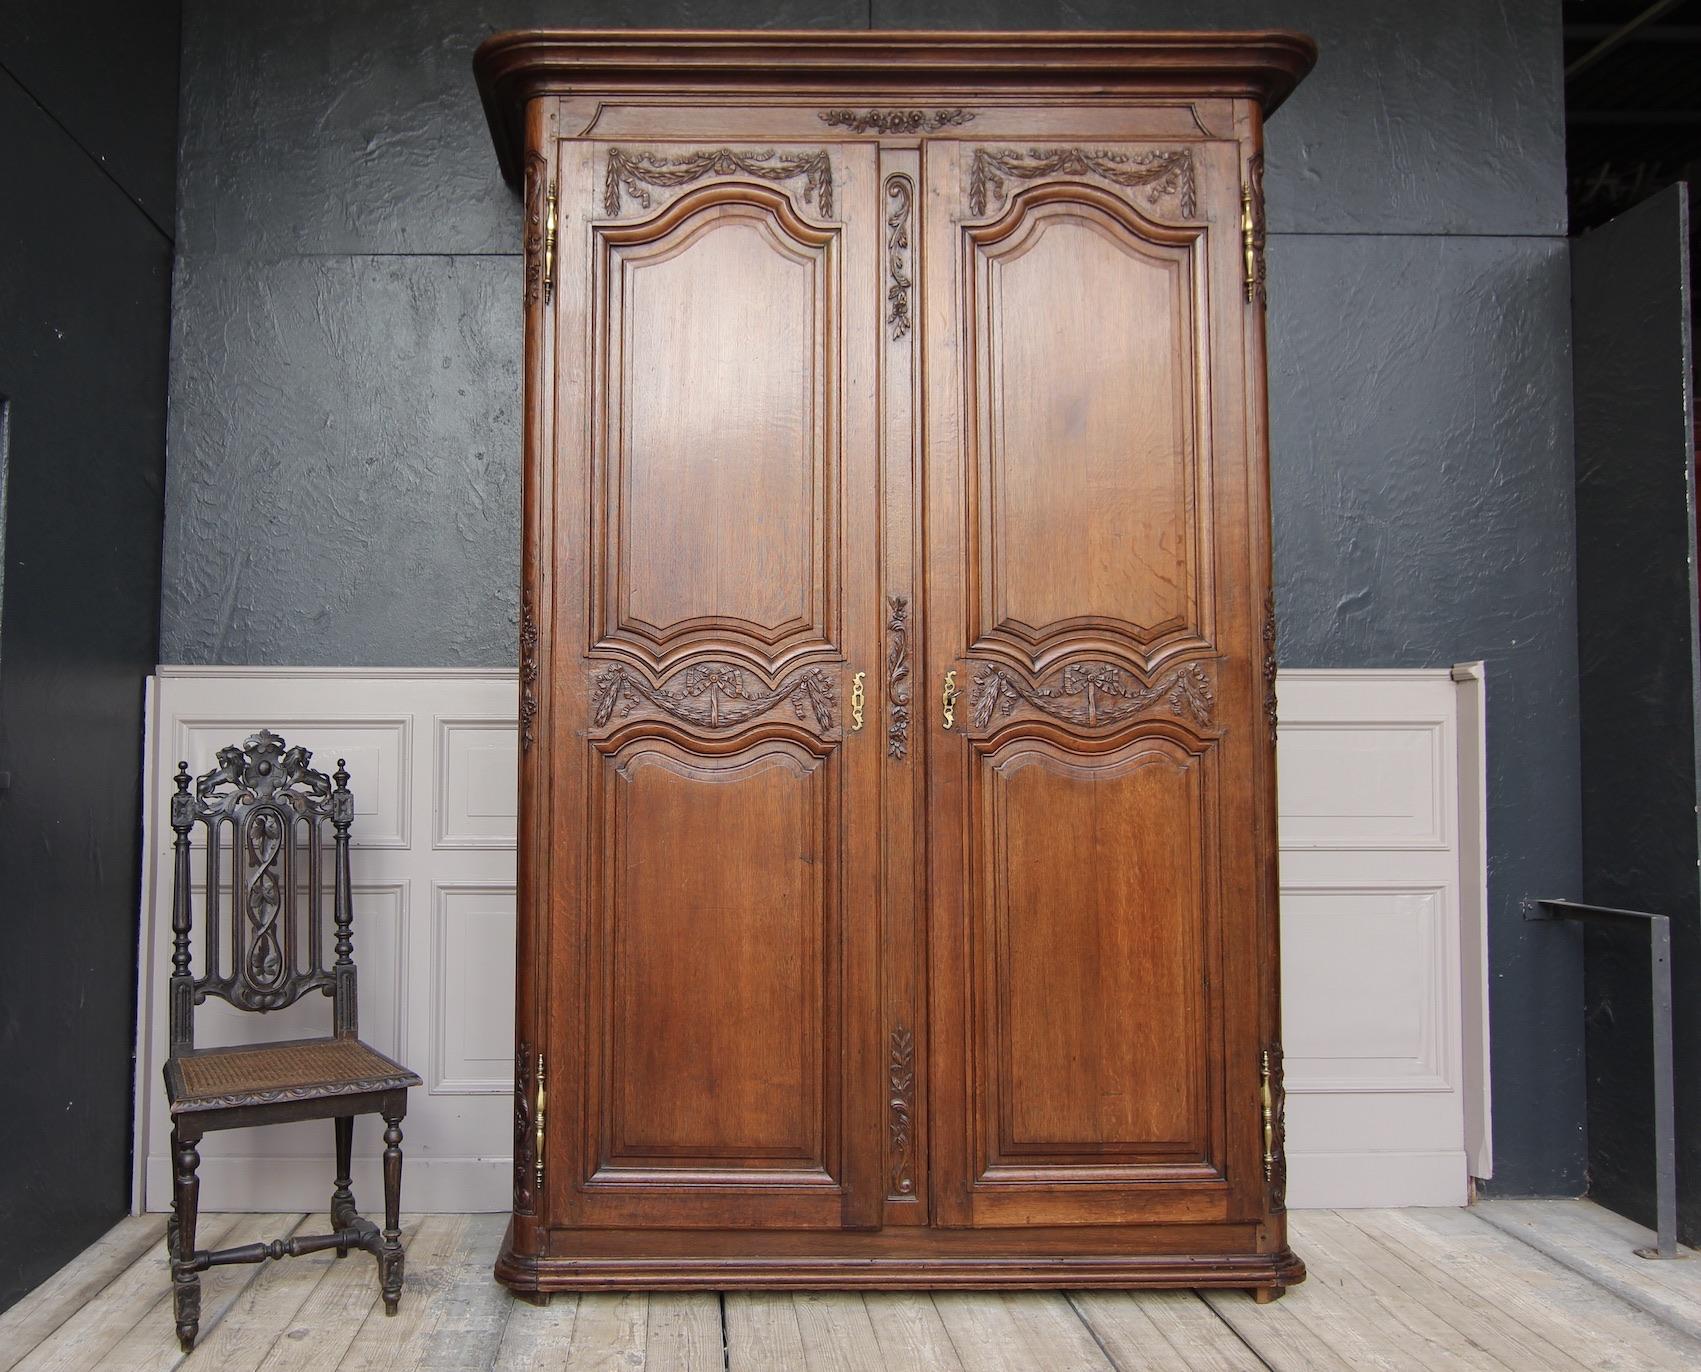 Large late 18th-century Louis XVI style armoire or cabinet from France. Made of solid oak and waxed. Circa from the end of the 18th century.
Body, with rounded corners, partially carved. Tall doors on large hand-made external brass fittings.
2